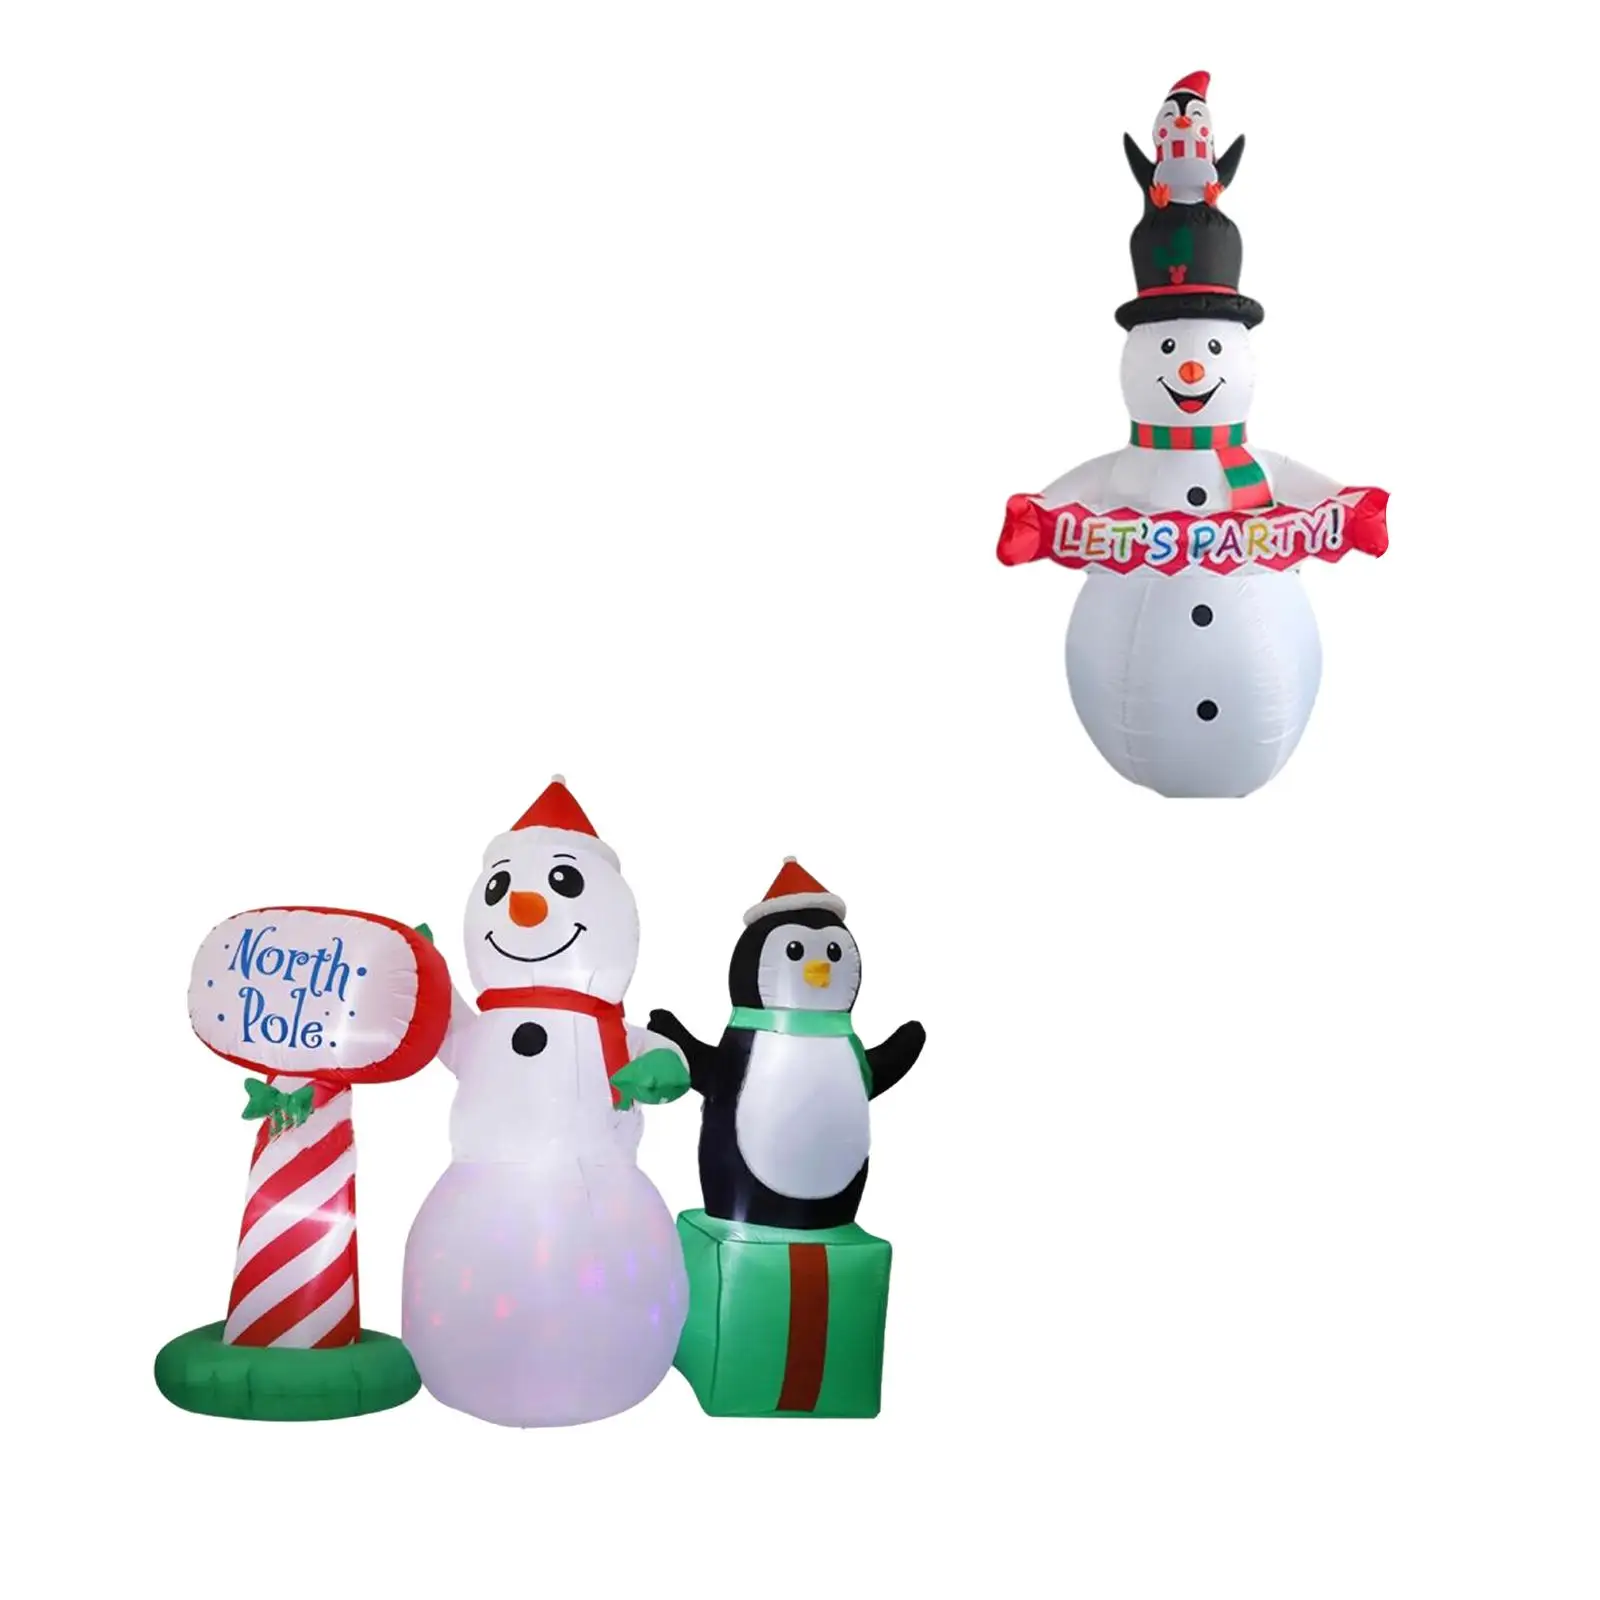 Christmas Inflatables Props with LED Lights Weatherproof Inflatable Snowman Christmas Decor for Garden Xmas Holiday Outside Yard